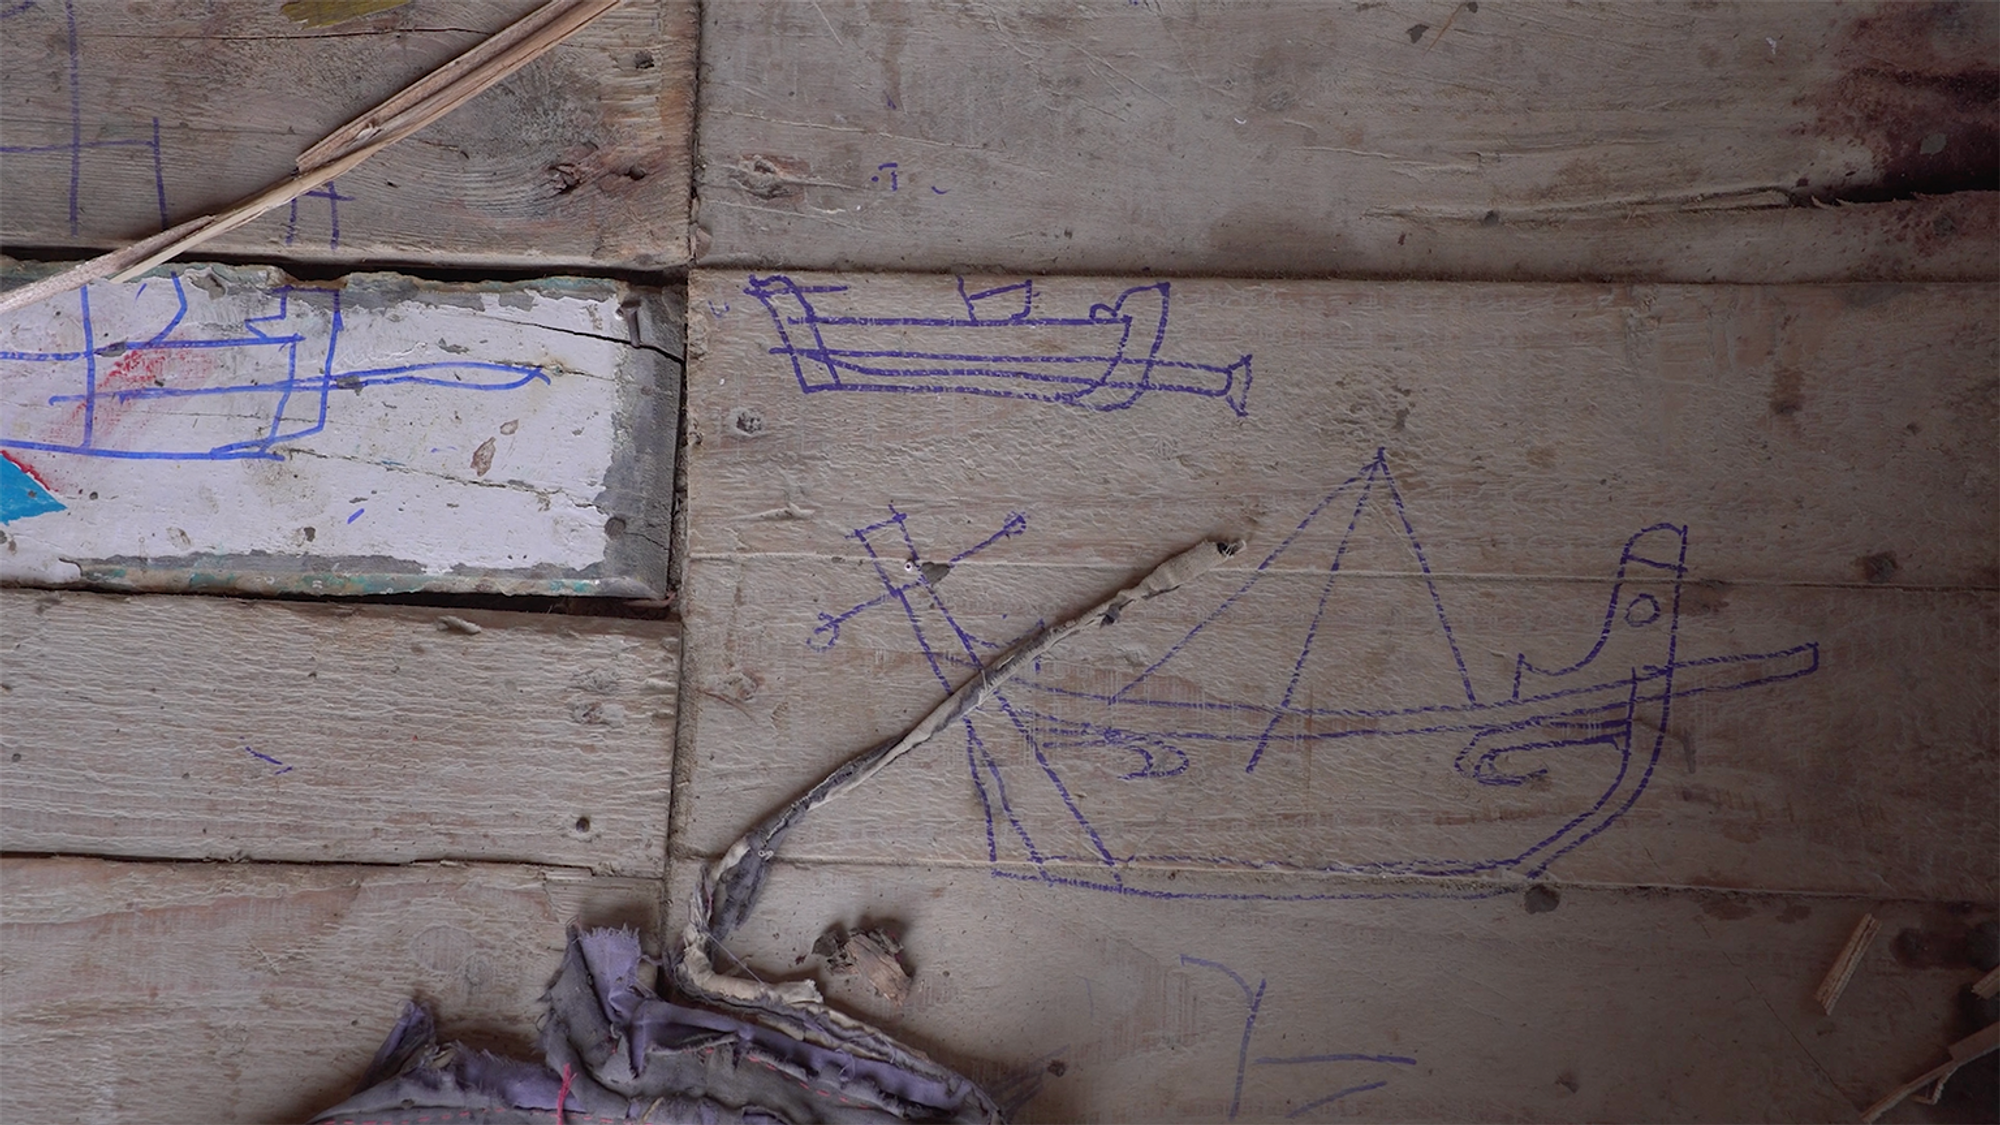 3 boats drawn in blue pen on a wooden floor, with ripped cloth in the foreground.